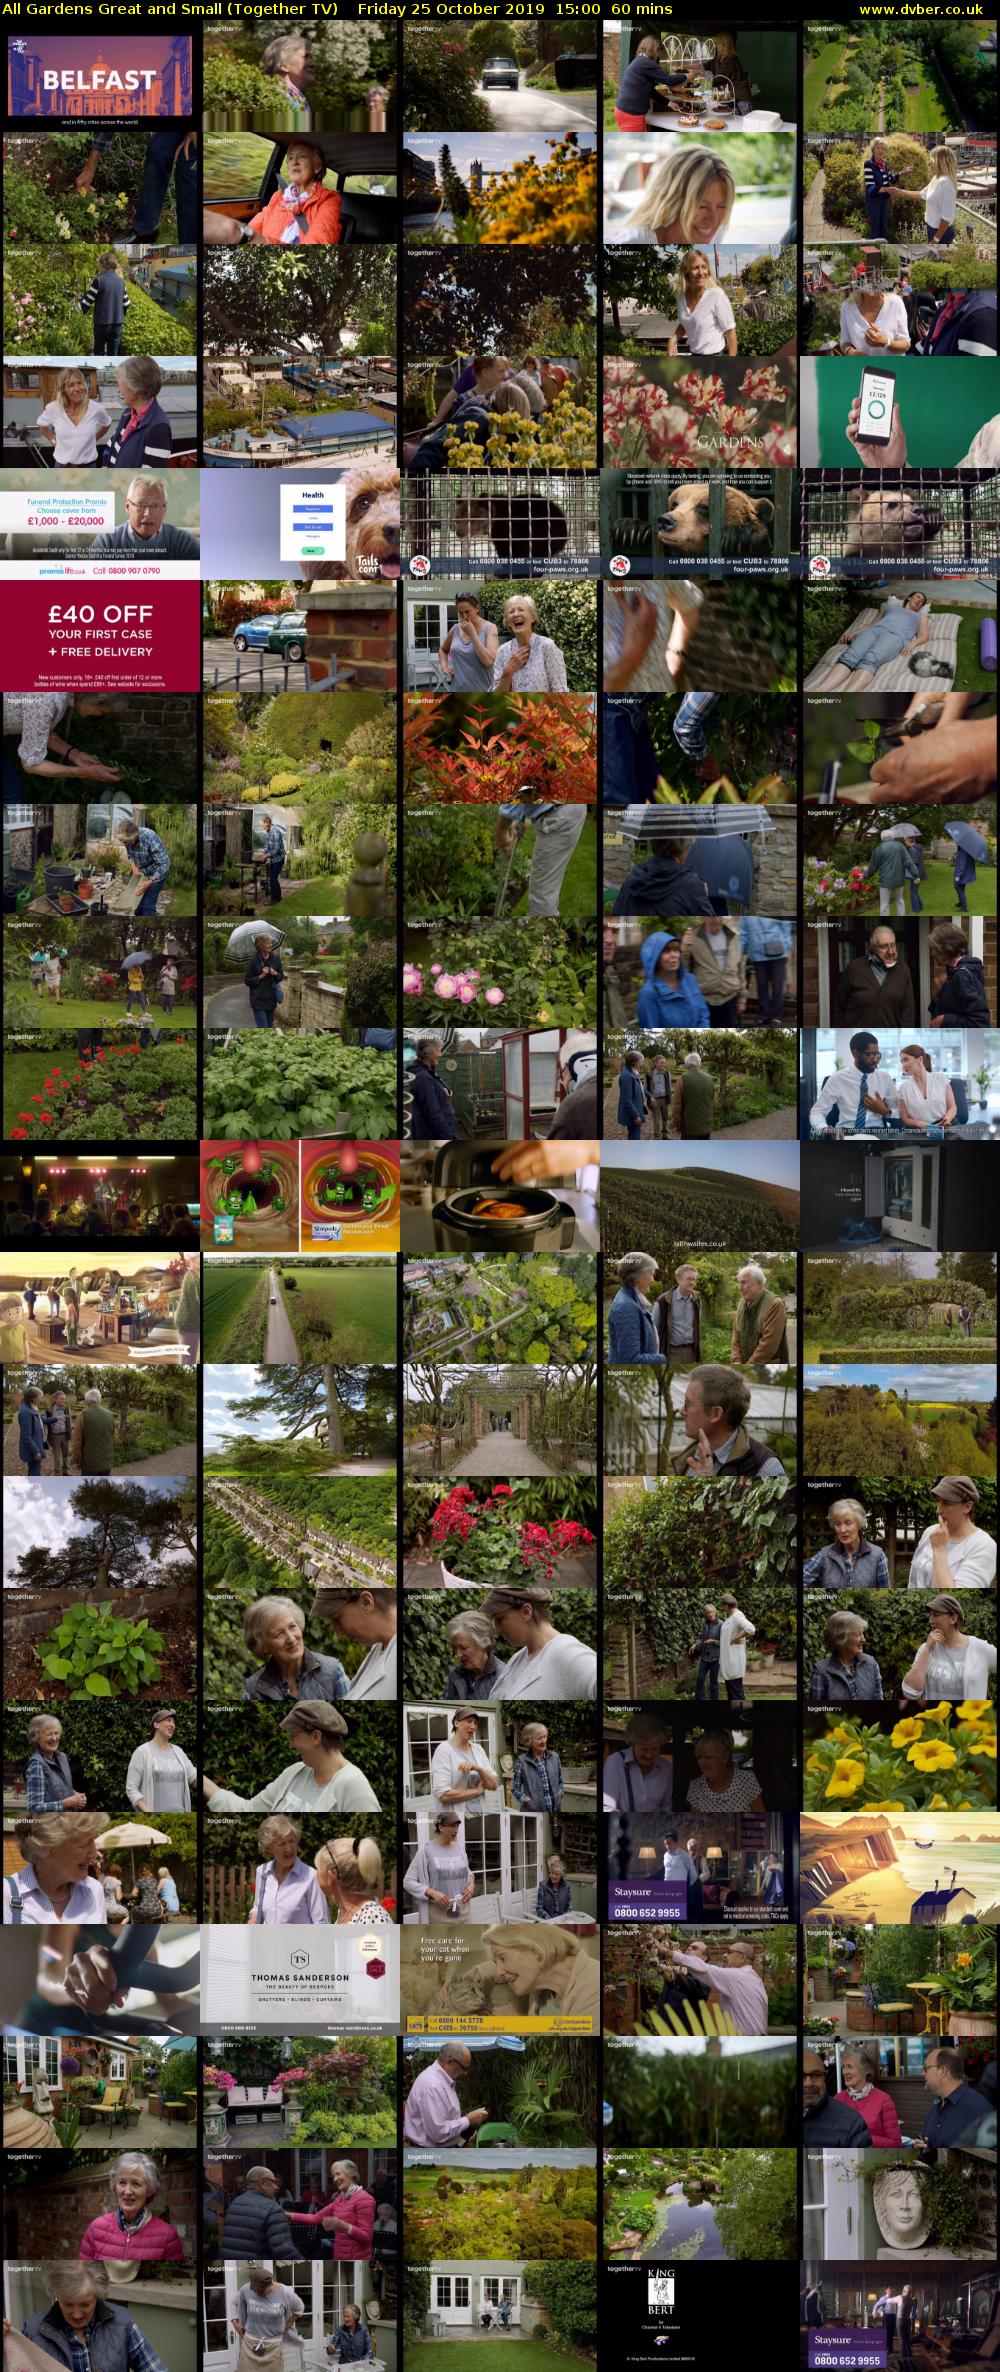 All Gardens Great and Small (Together TV) Friday 25 October 2019 15:00 - 16:00